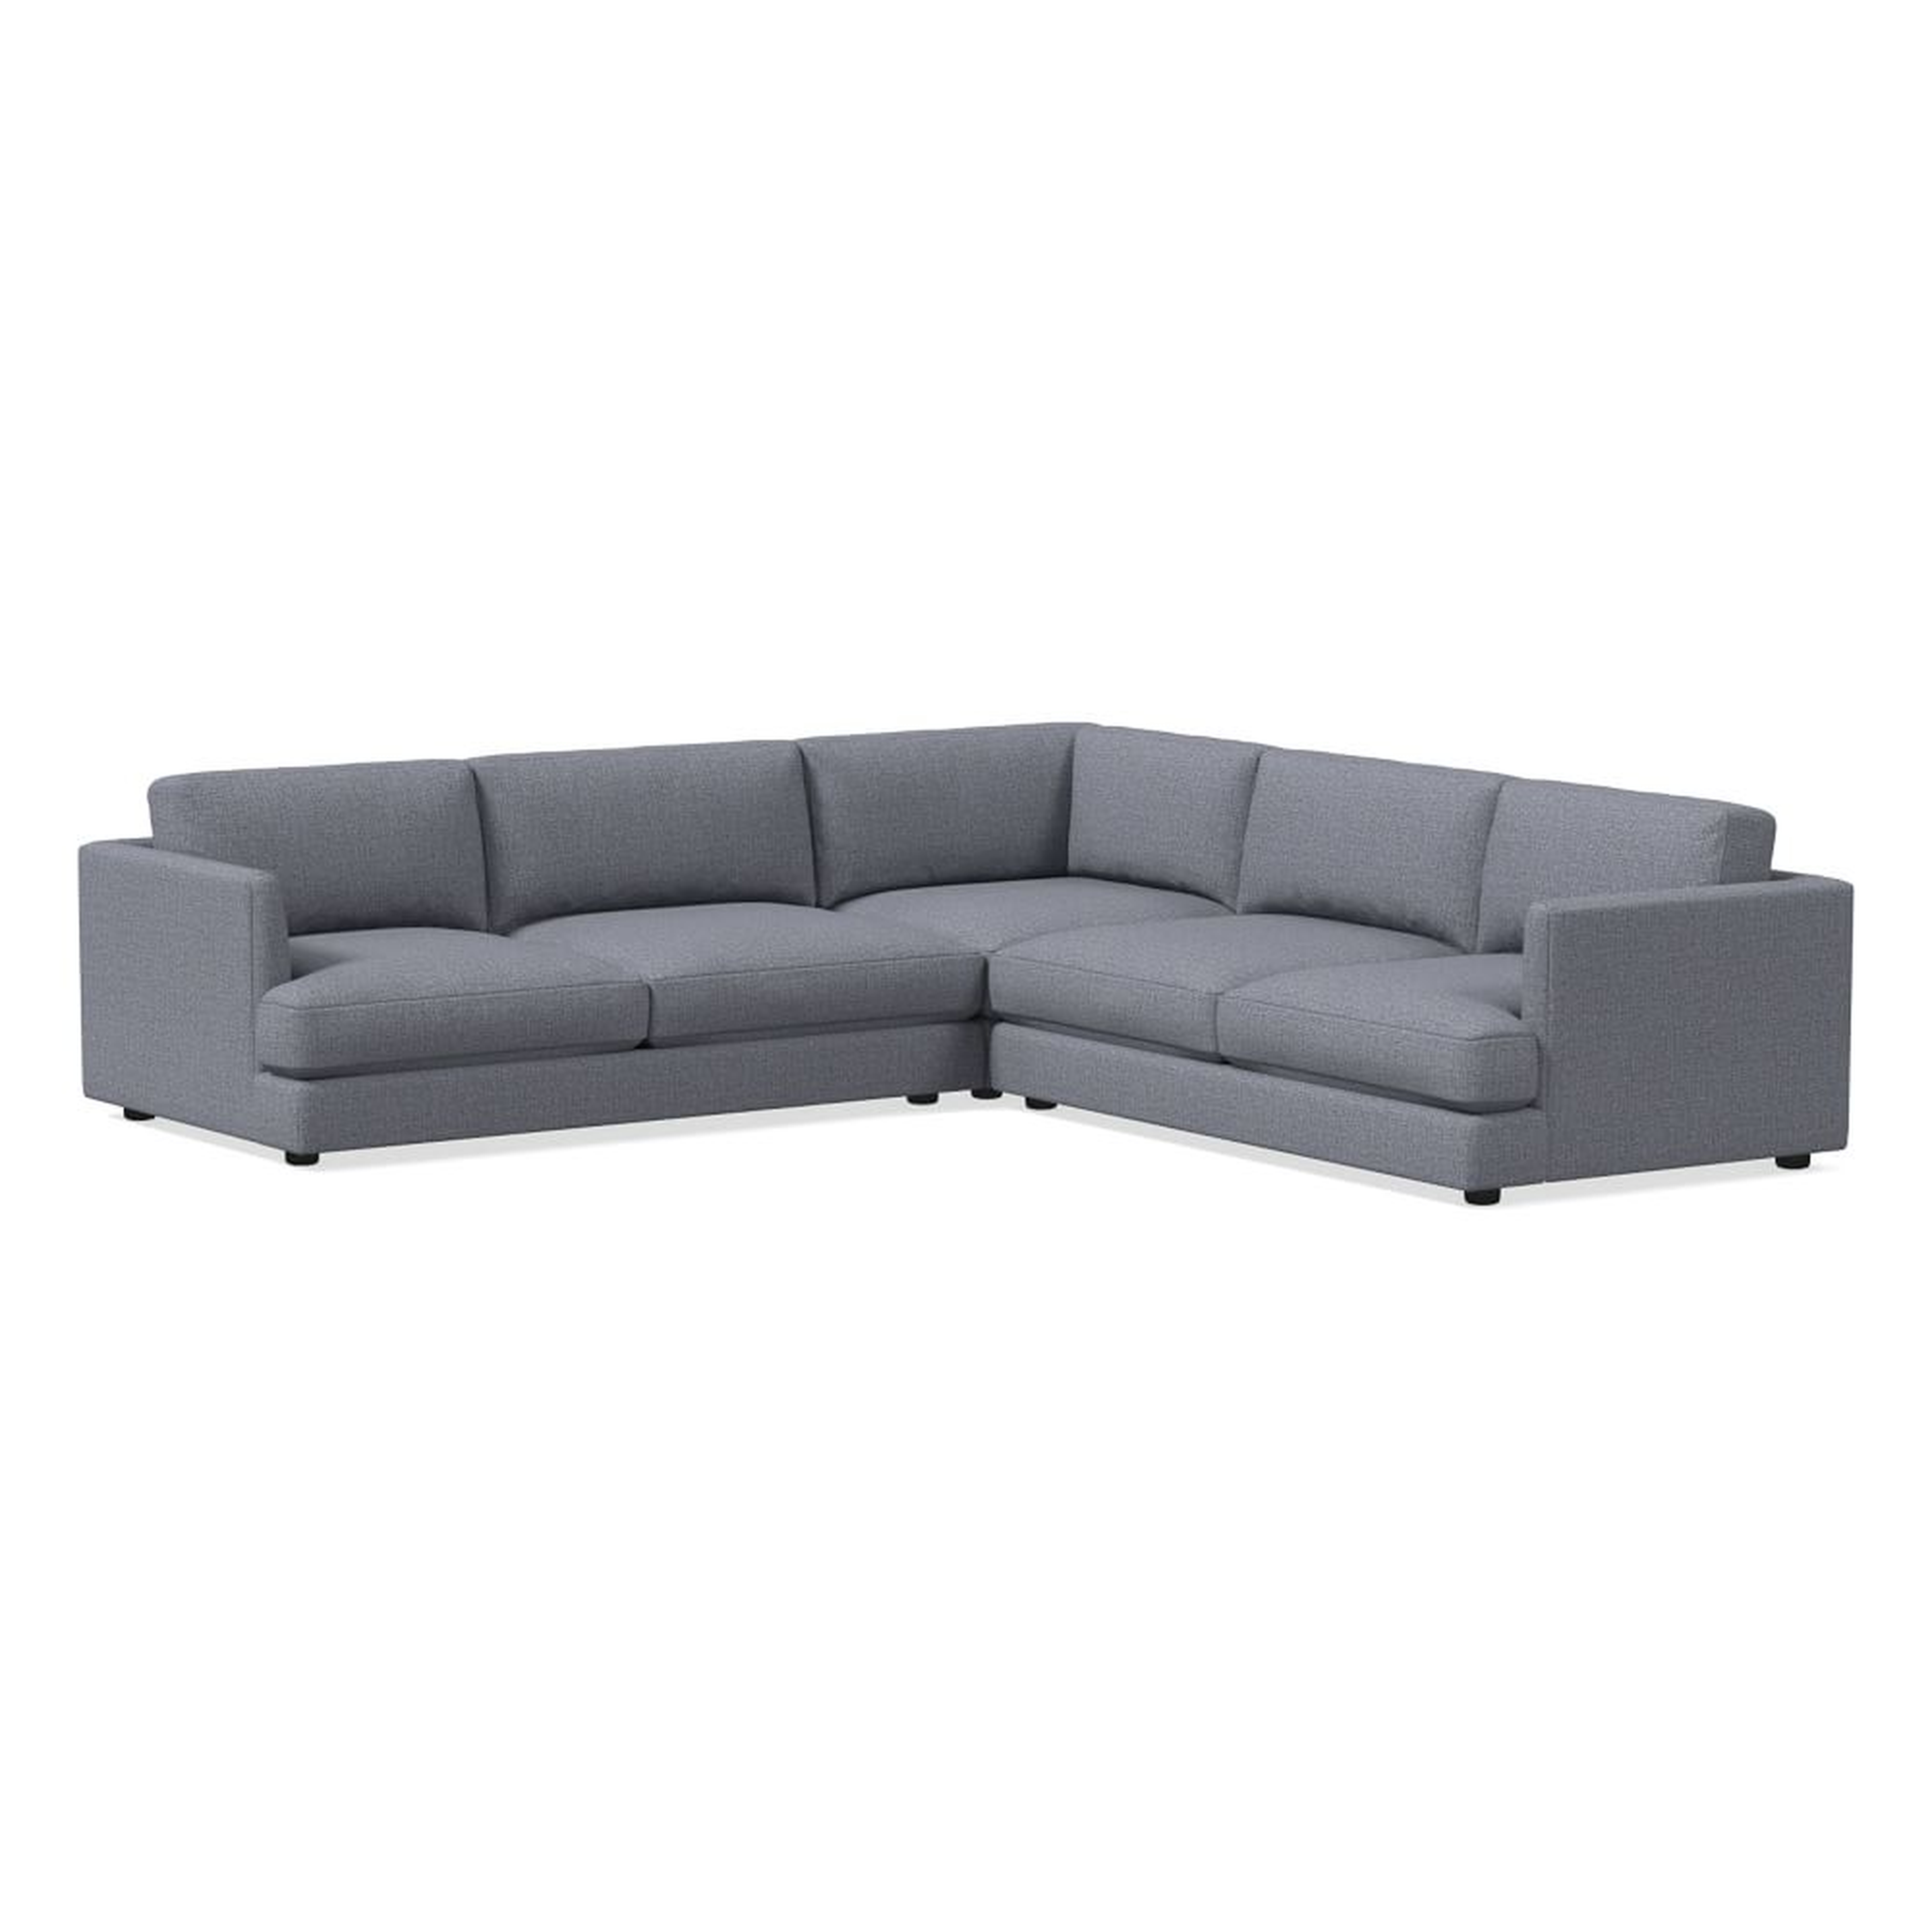 Haven 106" Multi Seat 3-Piece L-Shaped Sectional, Standard Depth, Performance Yarn Dyed Linen Weave, graphite - West Elm